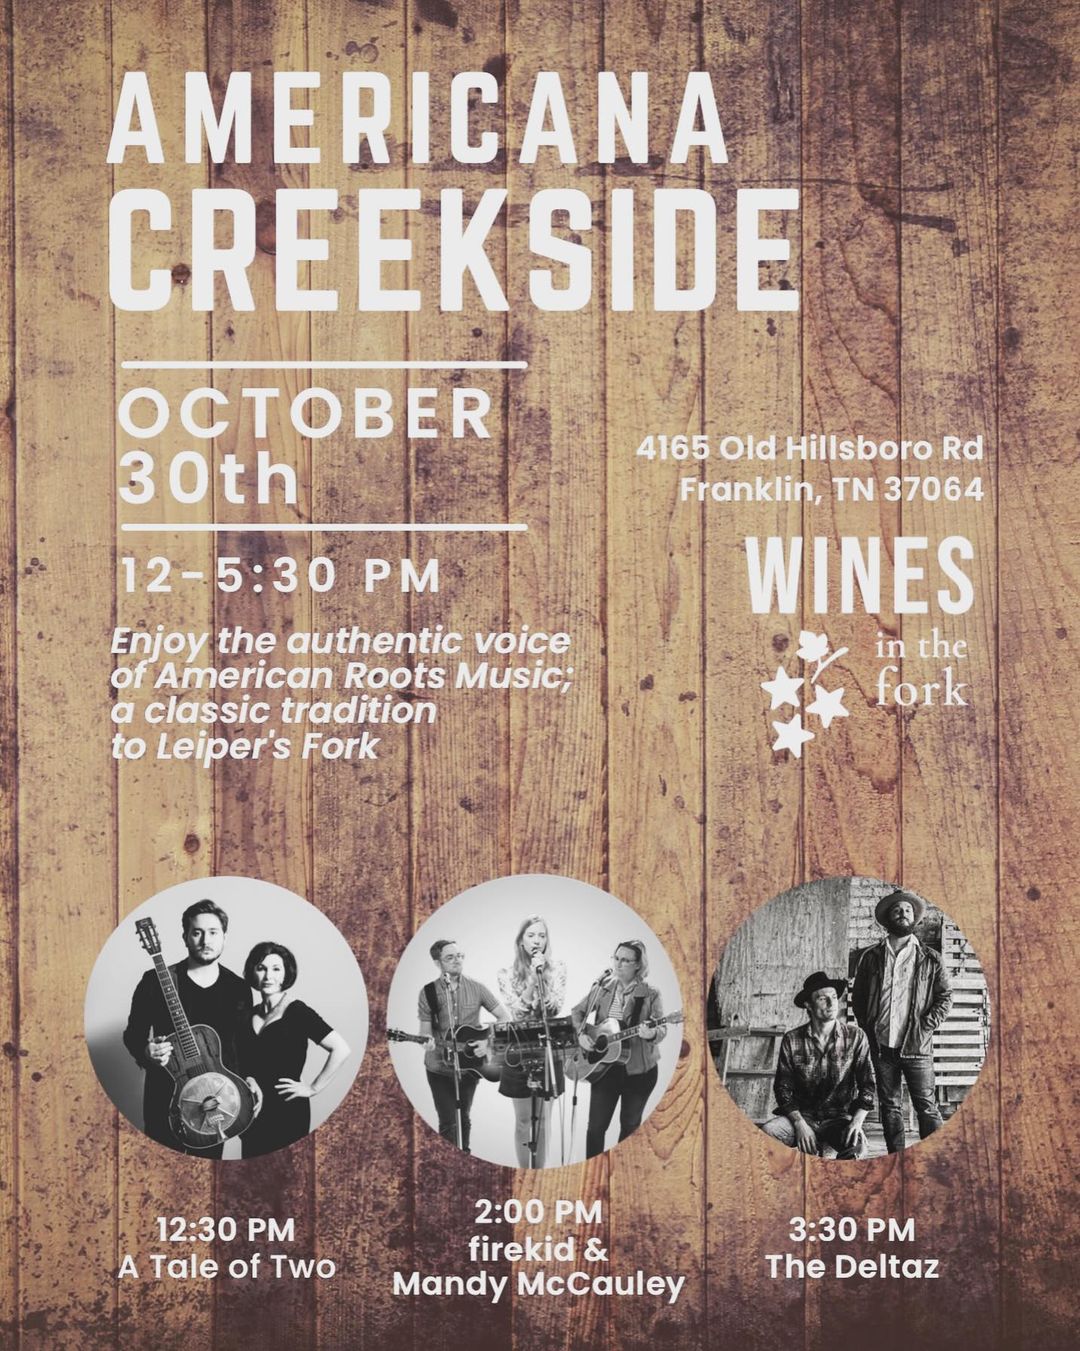 Wines in the Fork Americana Creekside event in Leiper's Fork, Franklin, TN.